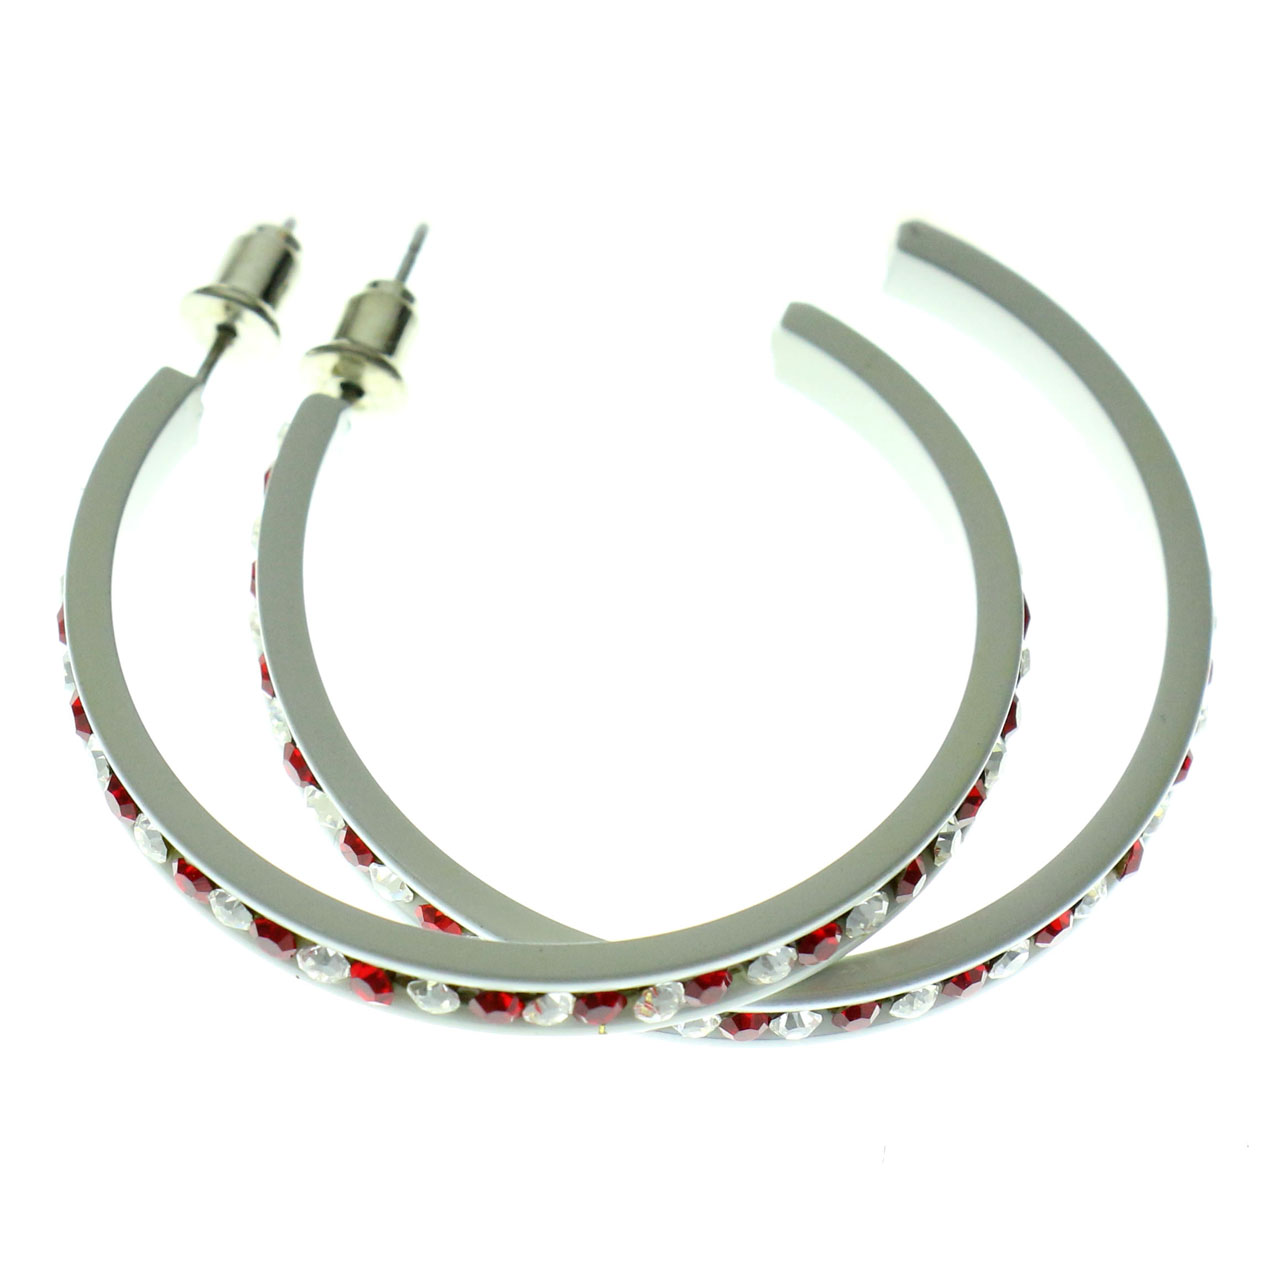 MI AMORE Hoop Earrings With Multi-Color Faceted Crystal Accents EHP111 Silver-Tone